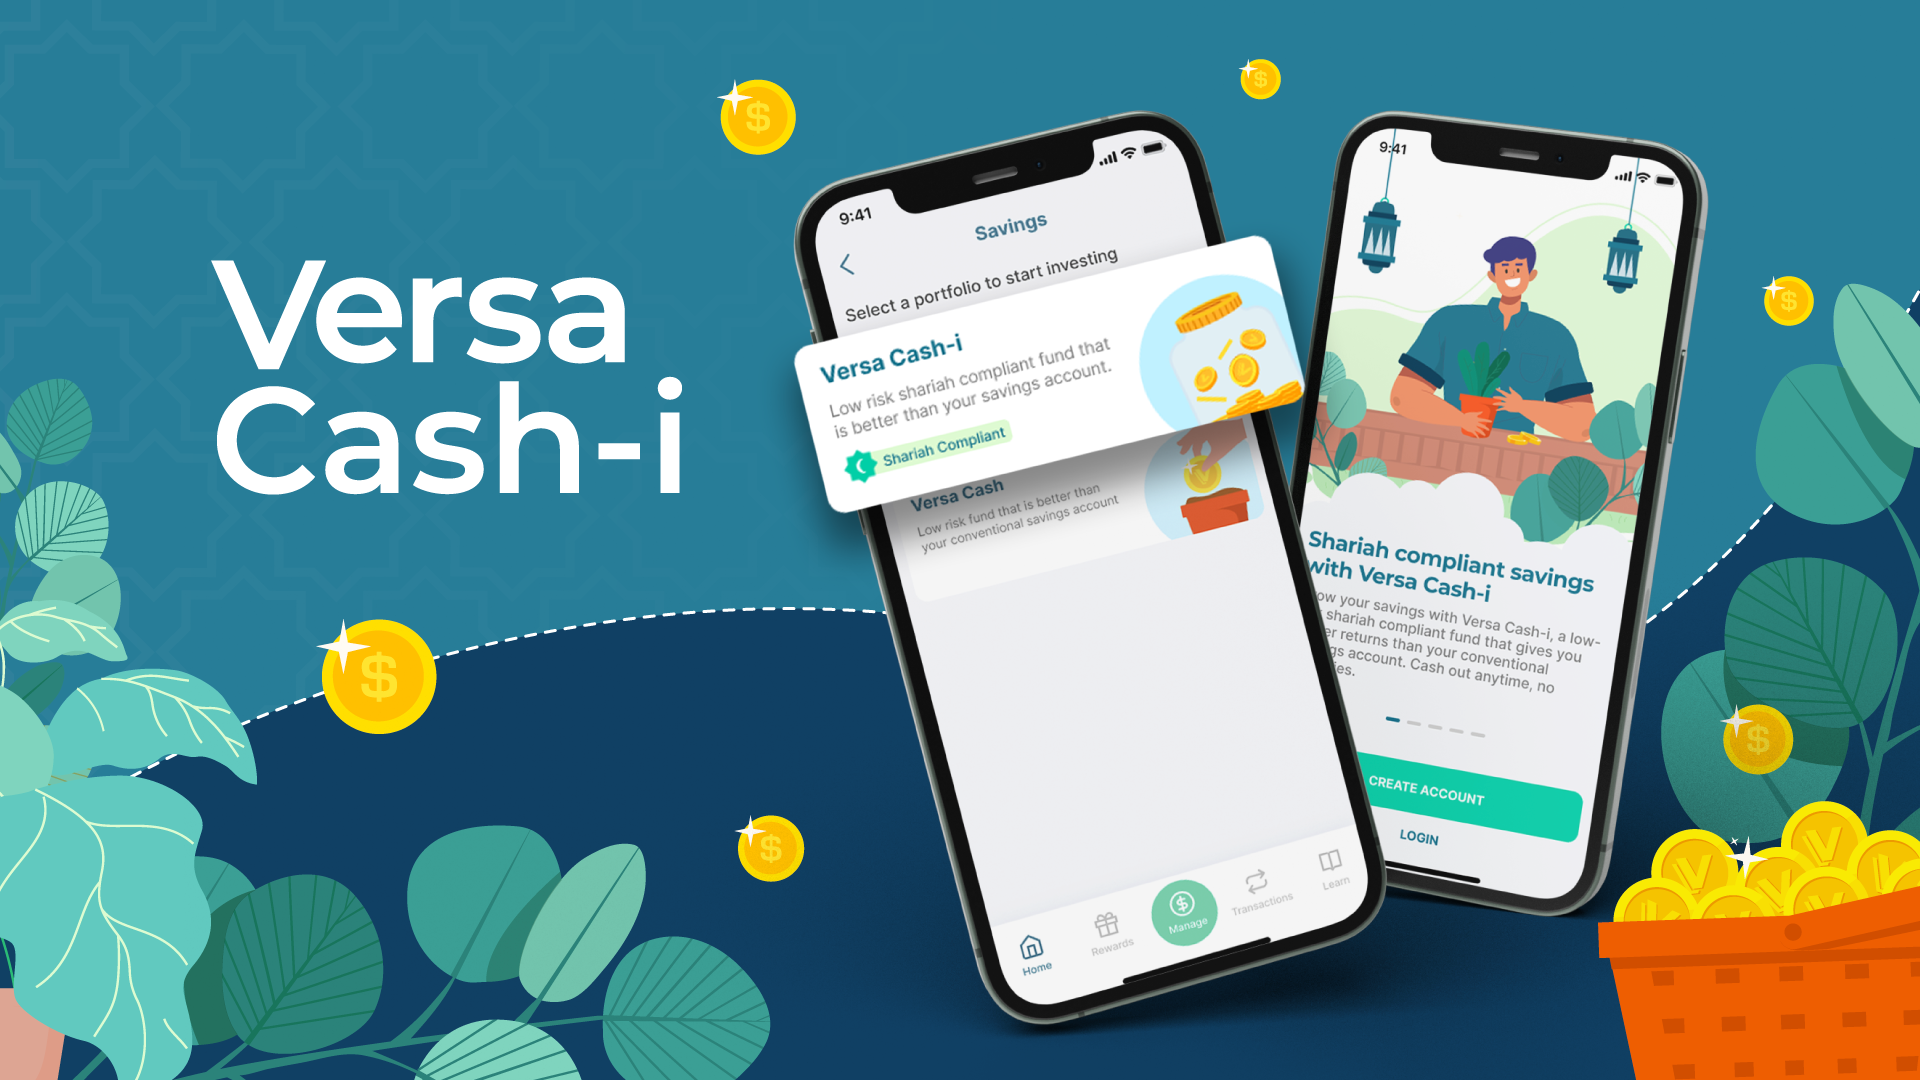 Get to know Versa Cash-i, our new Shariah-compliant Islamic money market fund